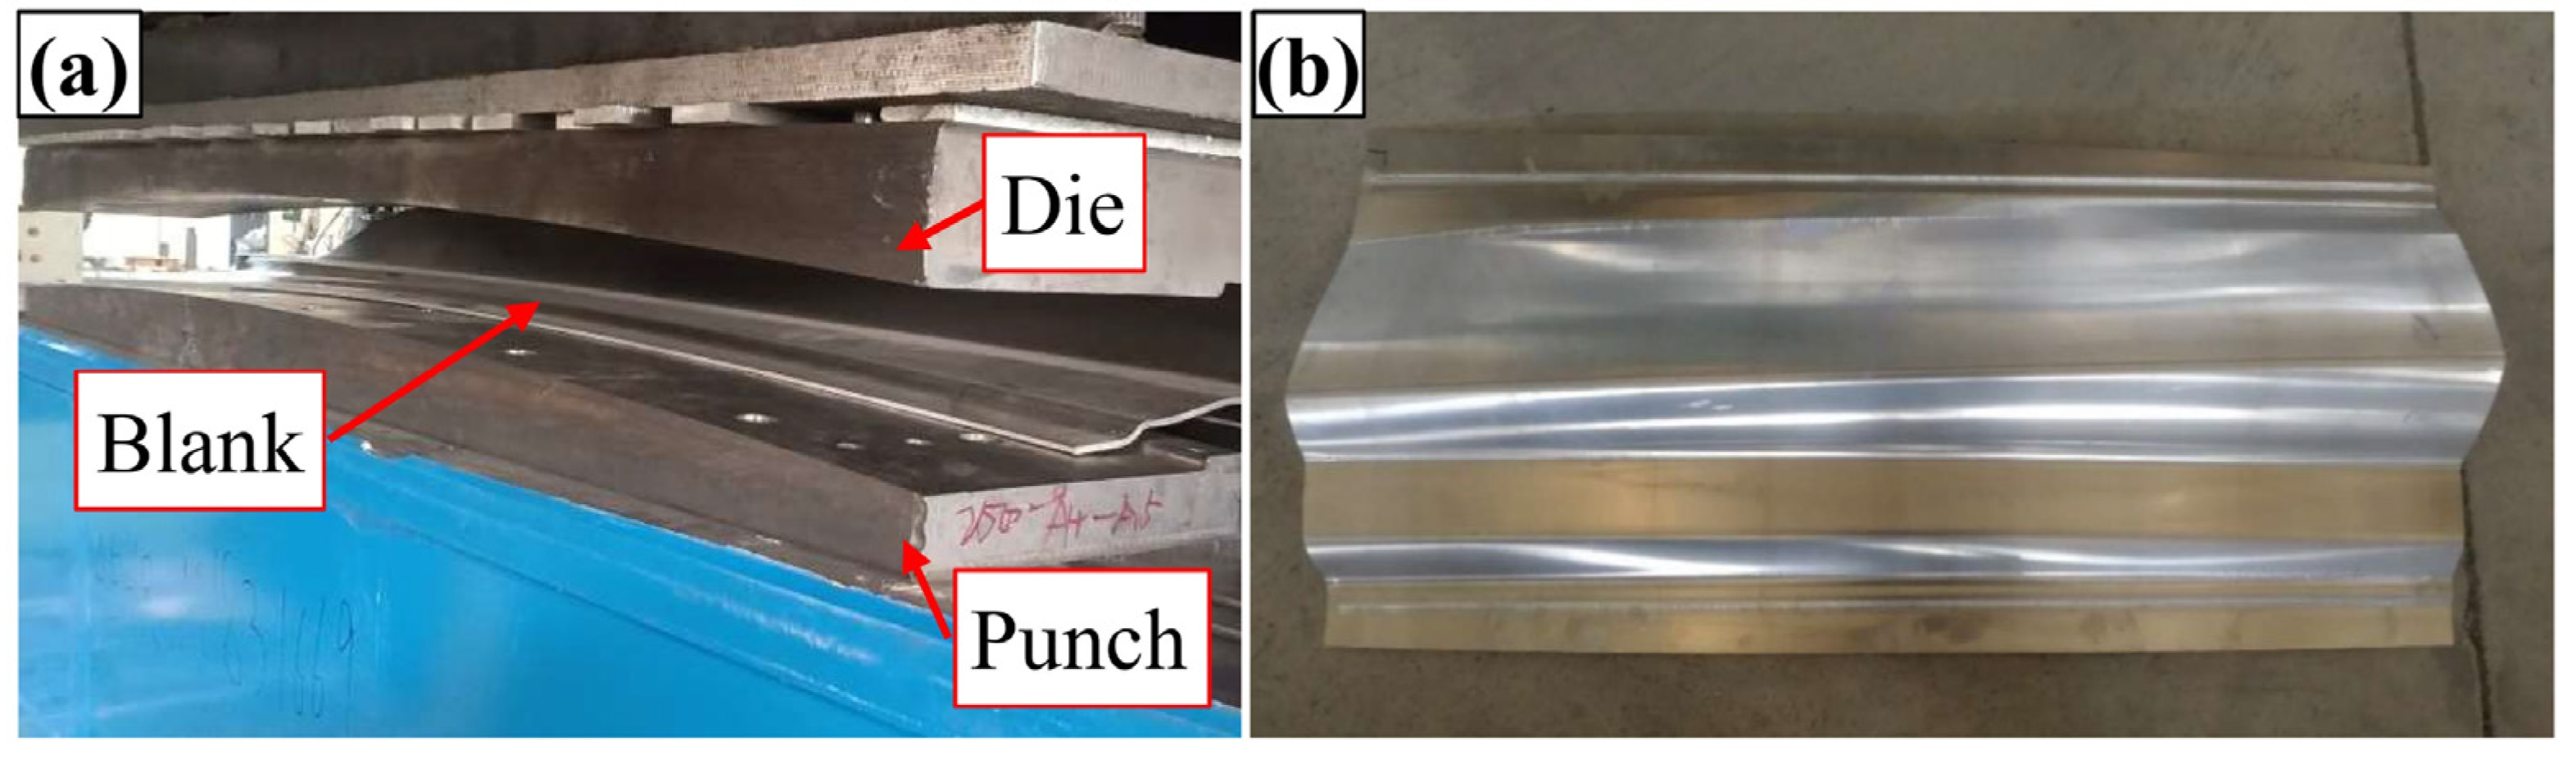 Materials | Free Full-Text | Investigation of the Hot Stamping-in-Die ...